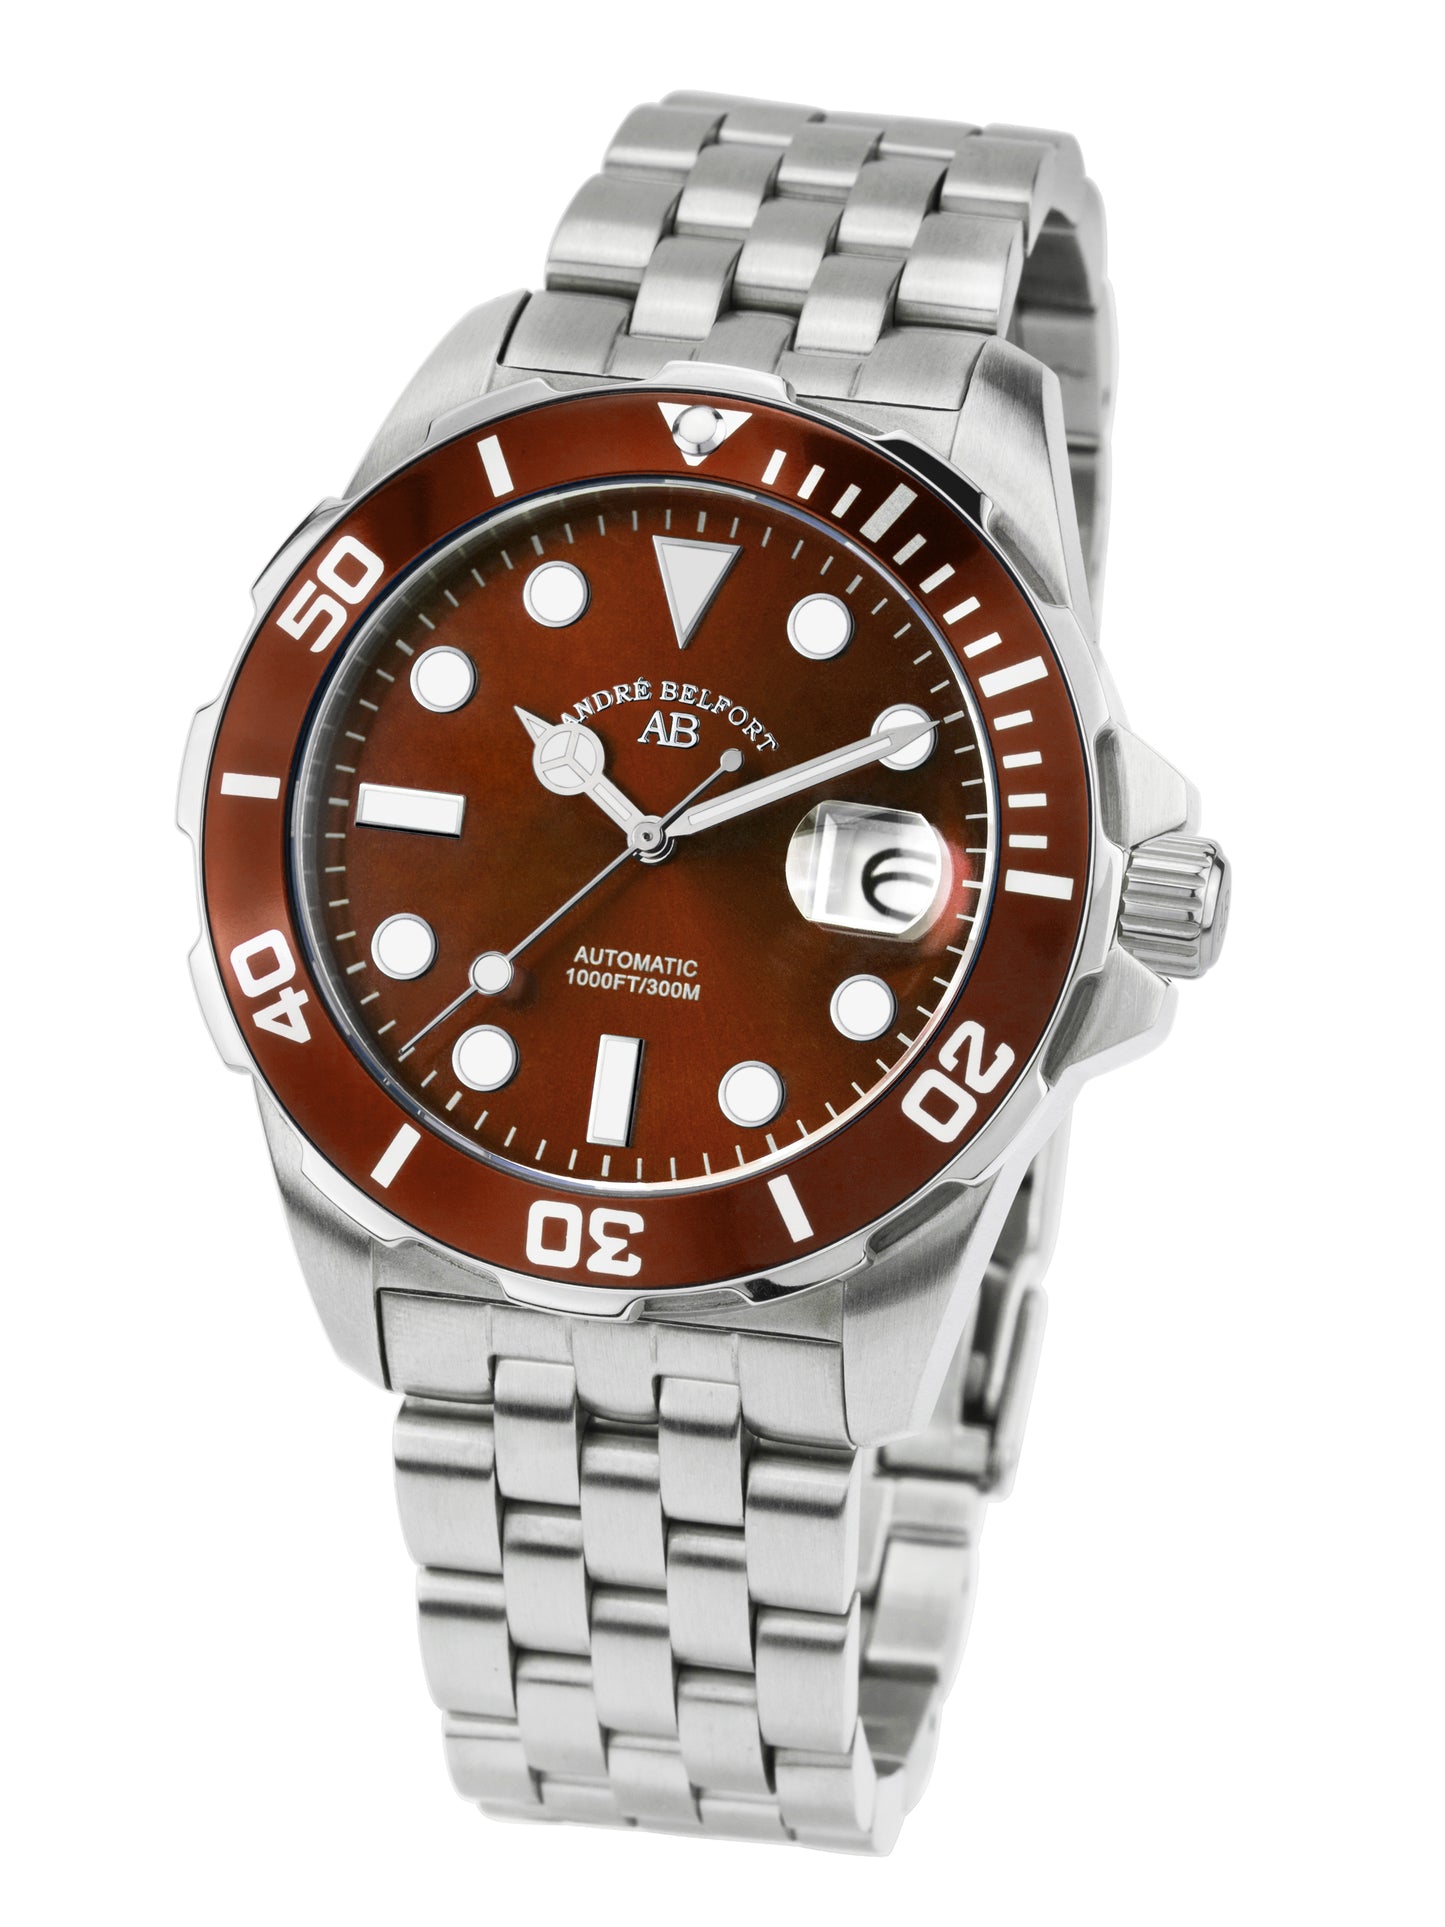 Automatic watches — Sous les mers — André Belfort — steel brown